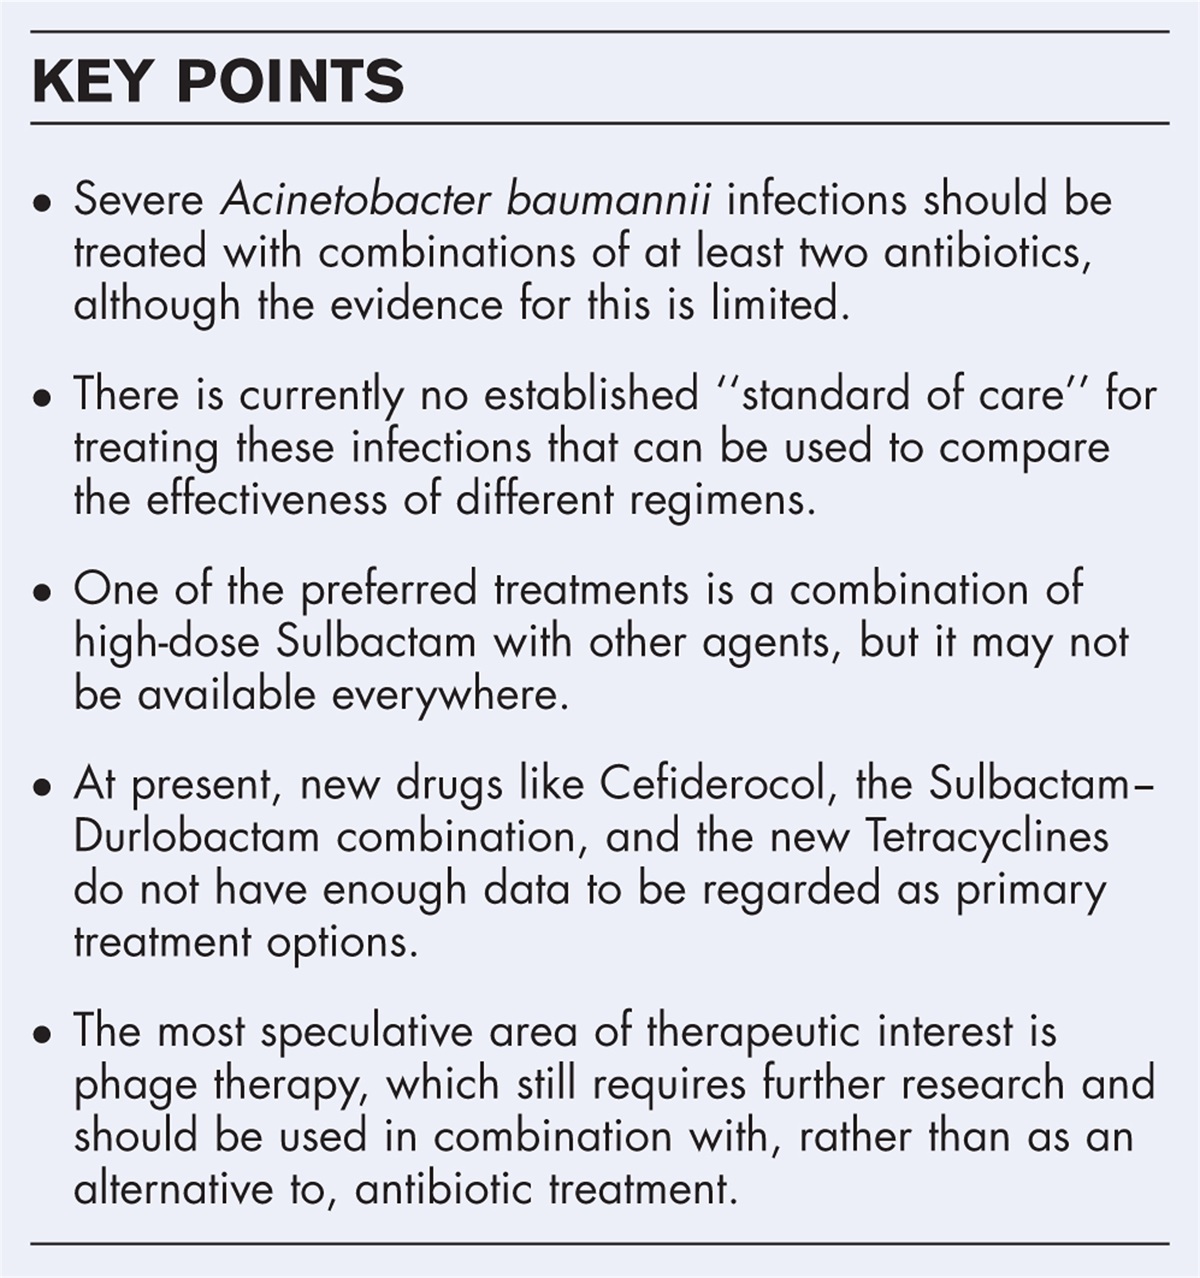 How to treat severe Acinetobacter baumannii infections